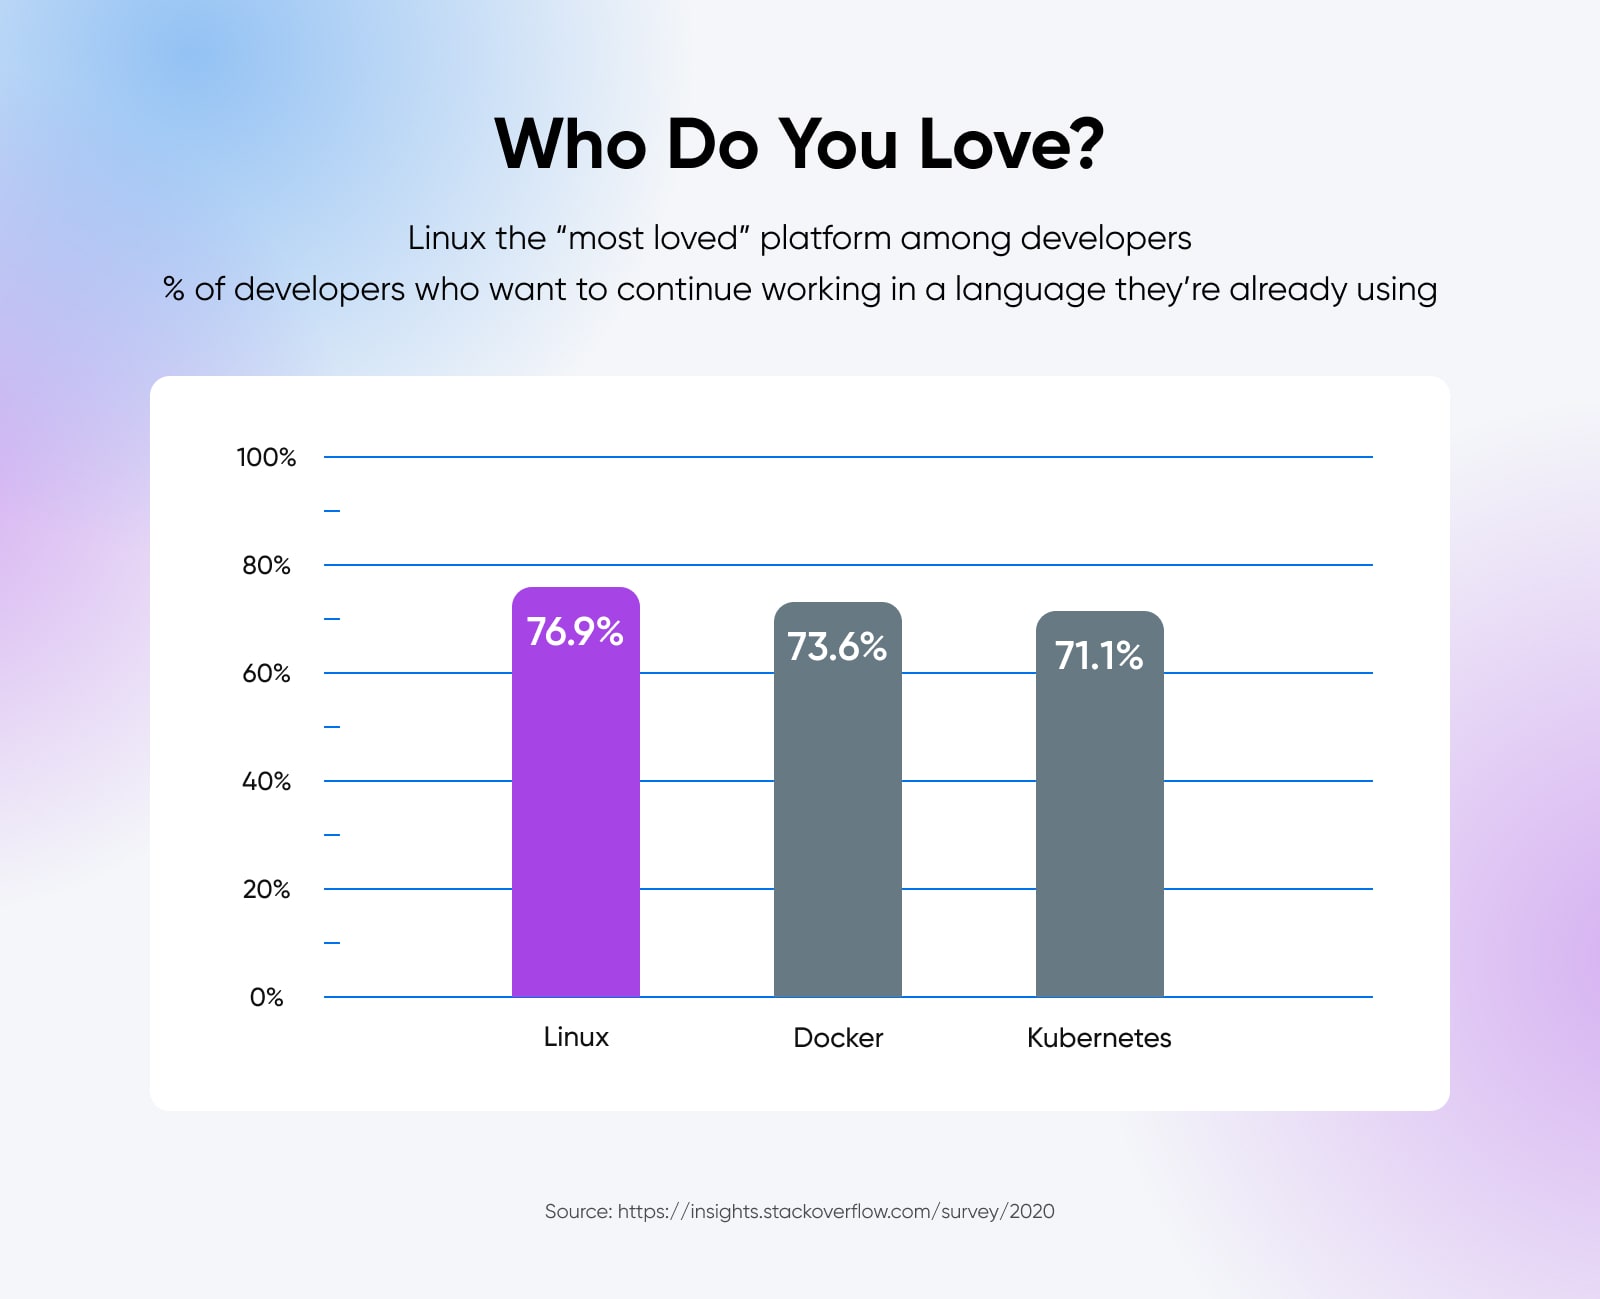 bar graph showing that developers prefer Linux (76.9%) compared to Docker (73.6%) and Kubernetes (71.1%)